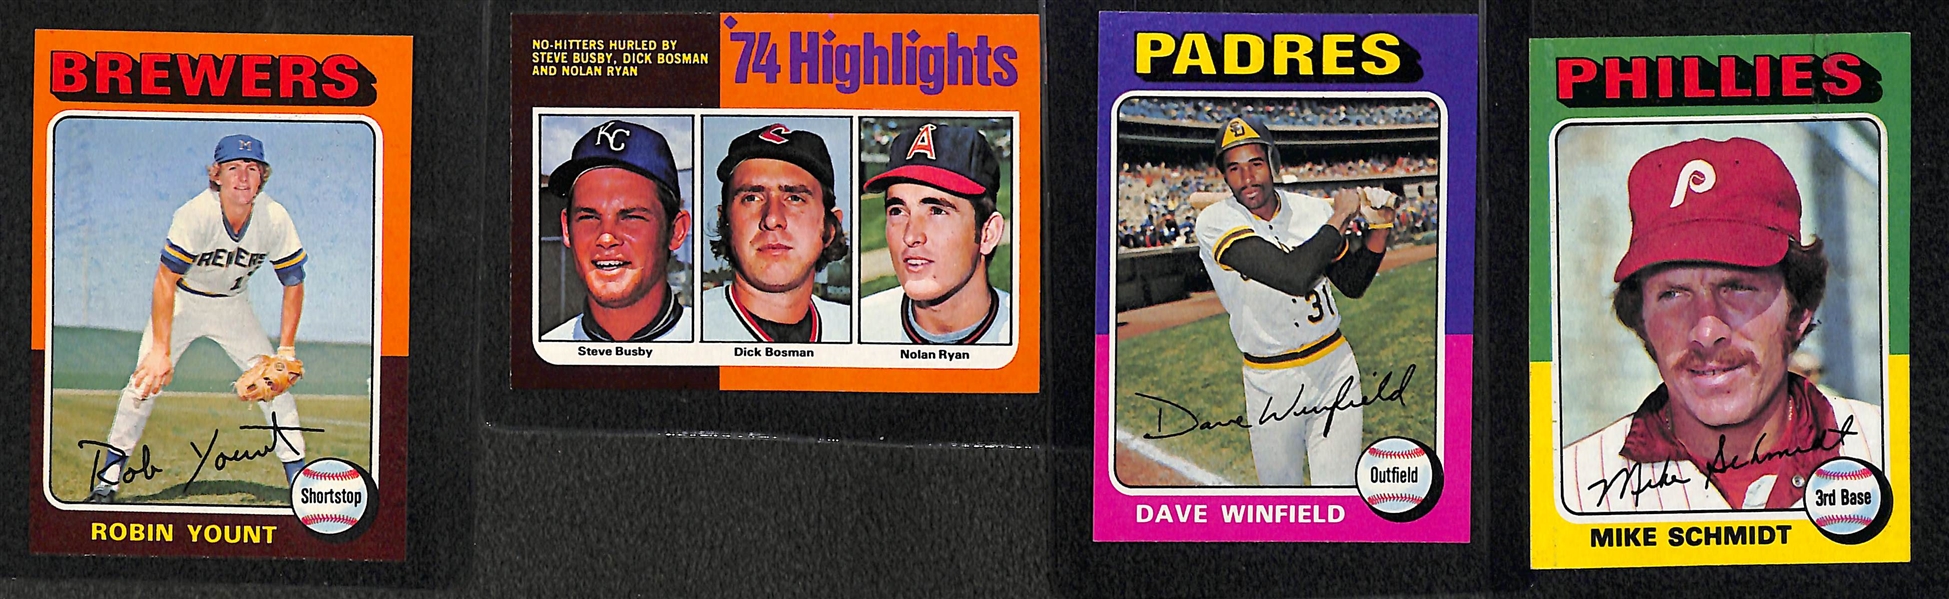 1975 Topps Baseball Card Set (Missing George Brett Rookie offered in above lot) - Many Pack-Fresh Cards